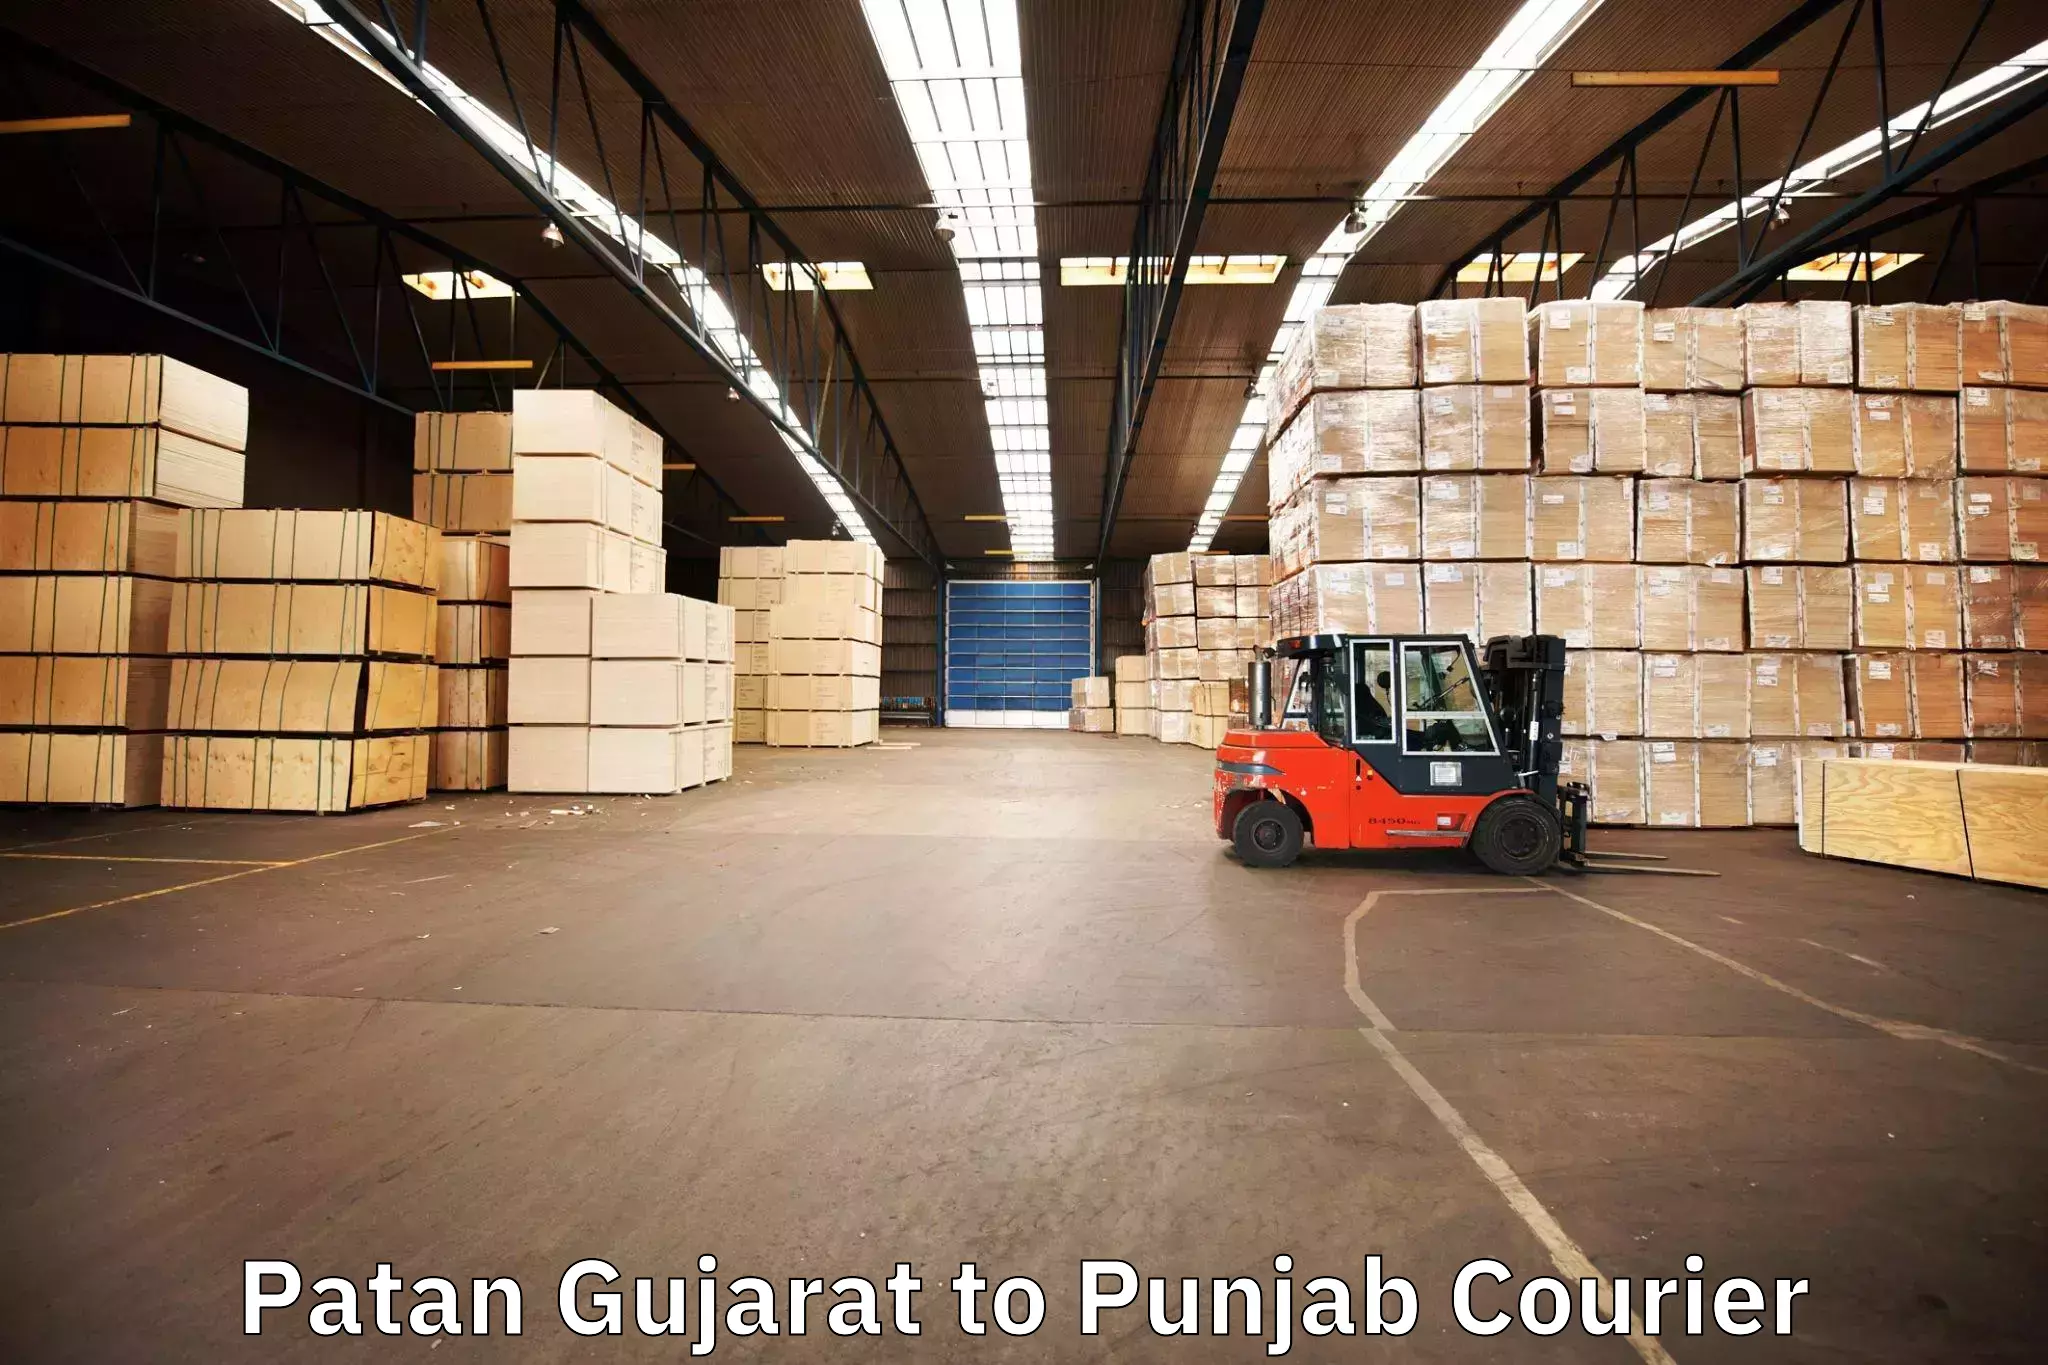 Trusted relocation services Patan Gujarat to Punjab